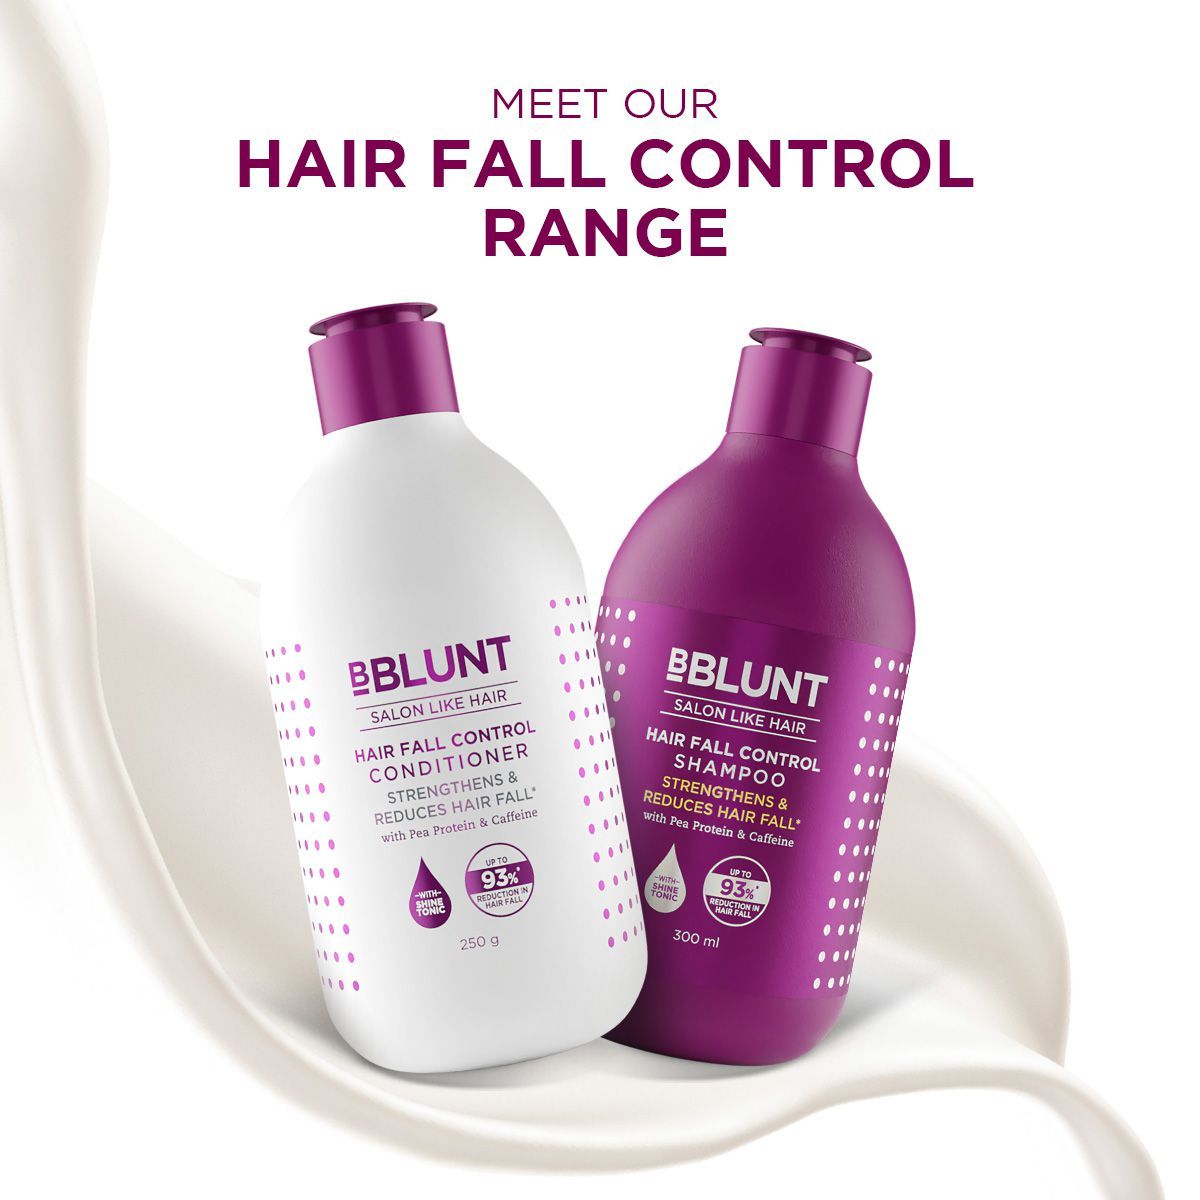 Pantene Pro V Hair Fall Control Conditioner Review  Be A Bride Every Day   Canadian Beauty Blog  Indian Beauty BlogMakeup BlogFashion BlogSkin  Care Blog